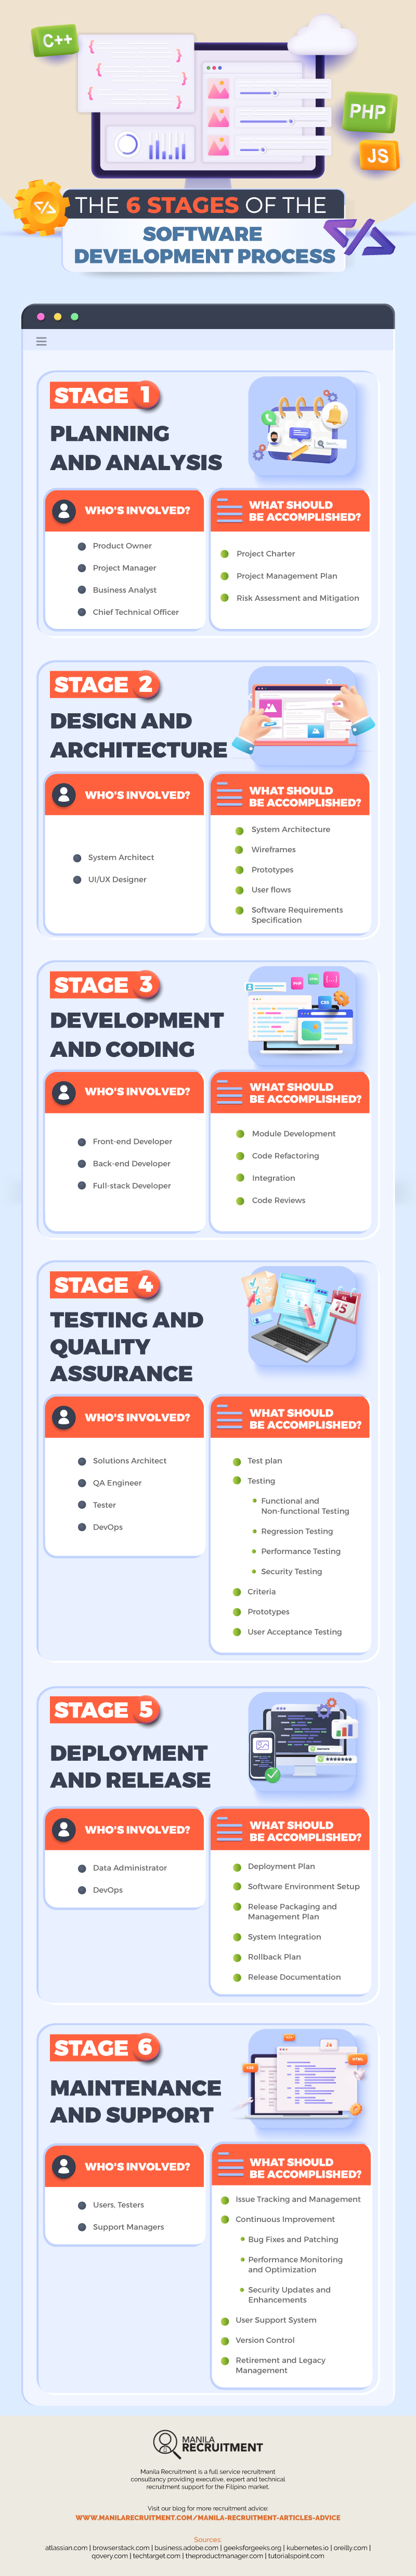 The 6 Stages of the Software Development Process Infographic